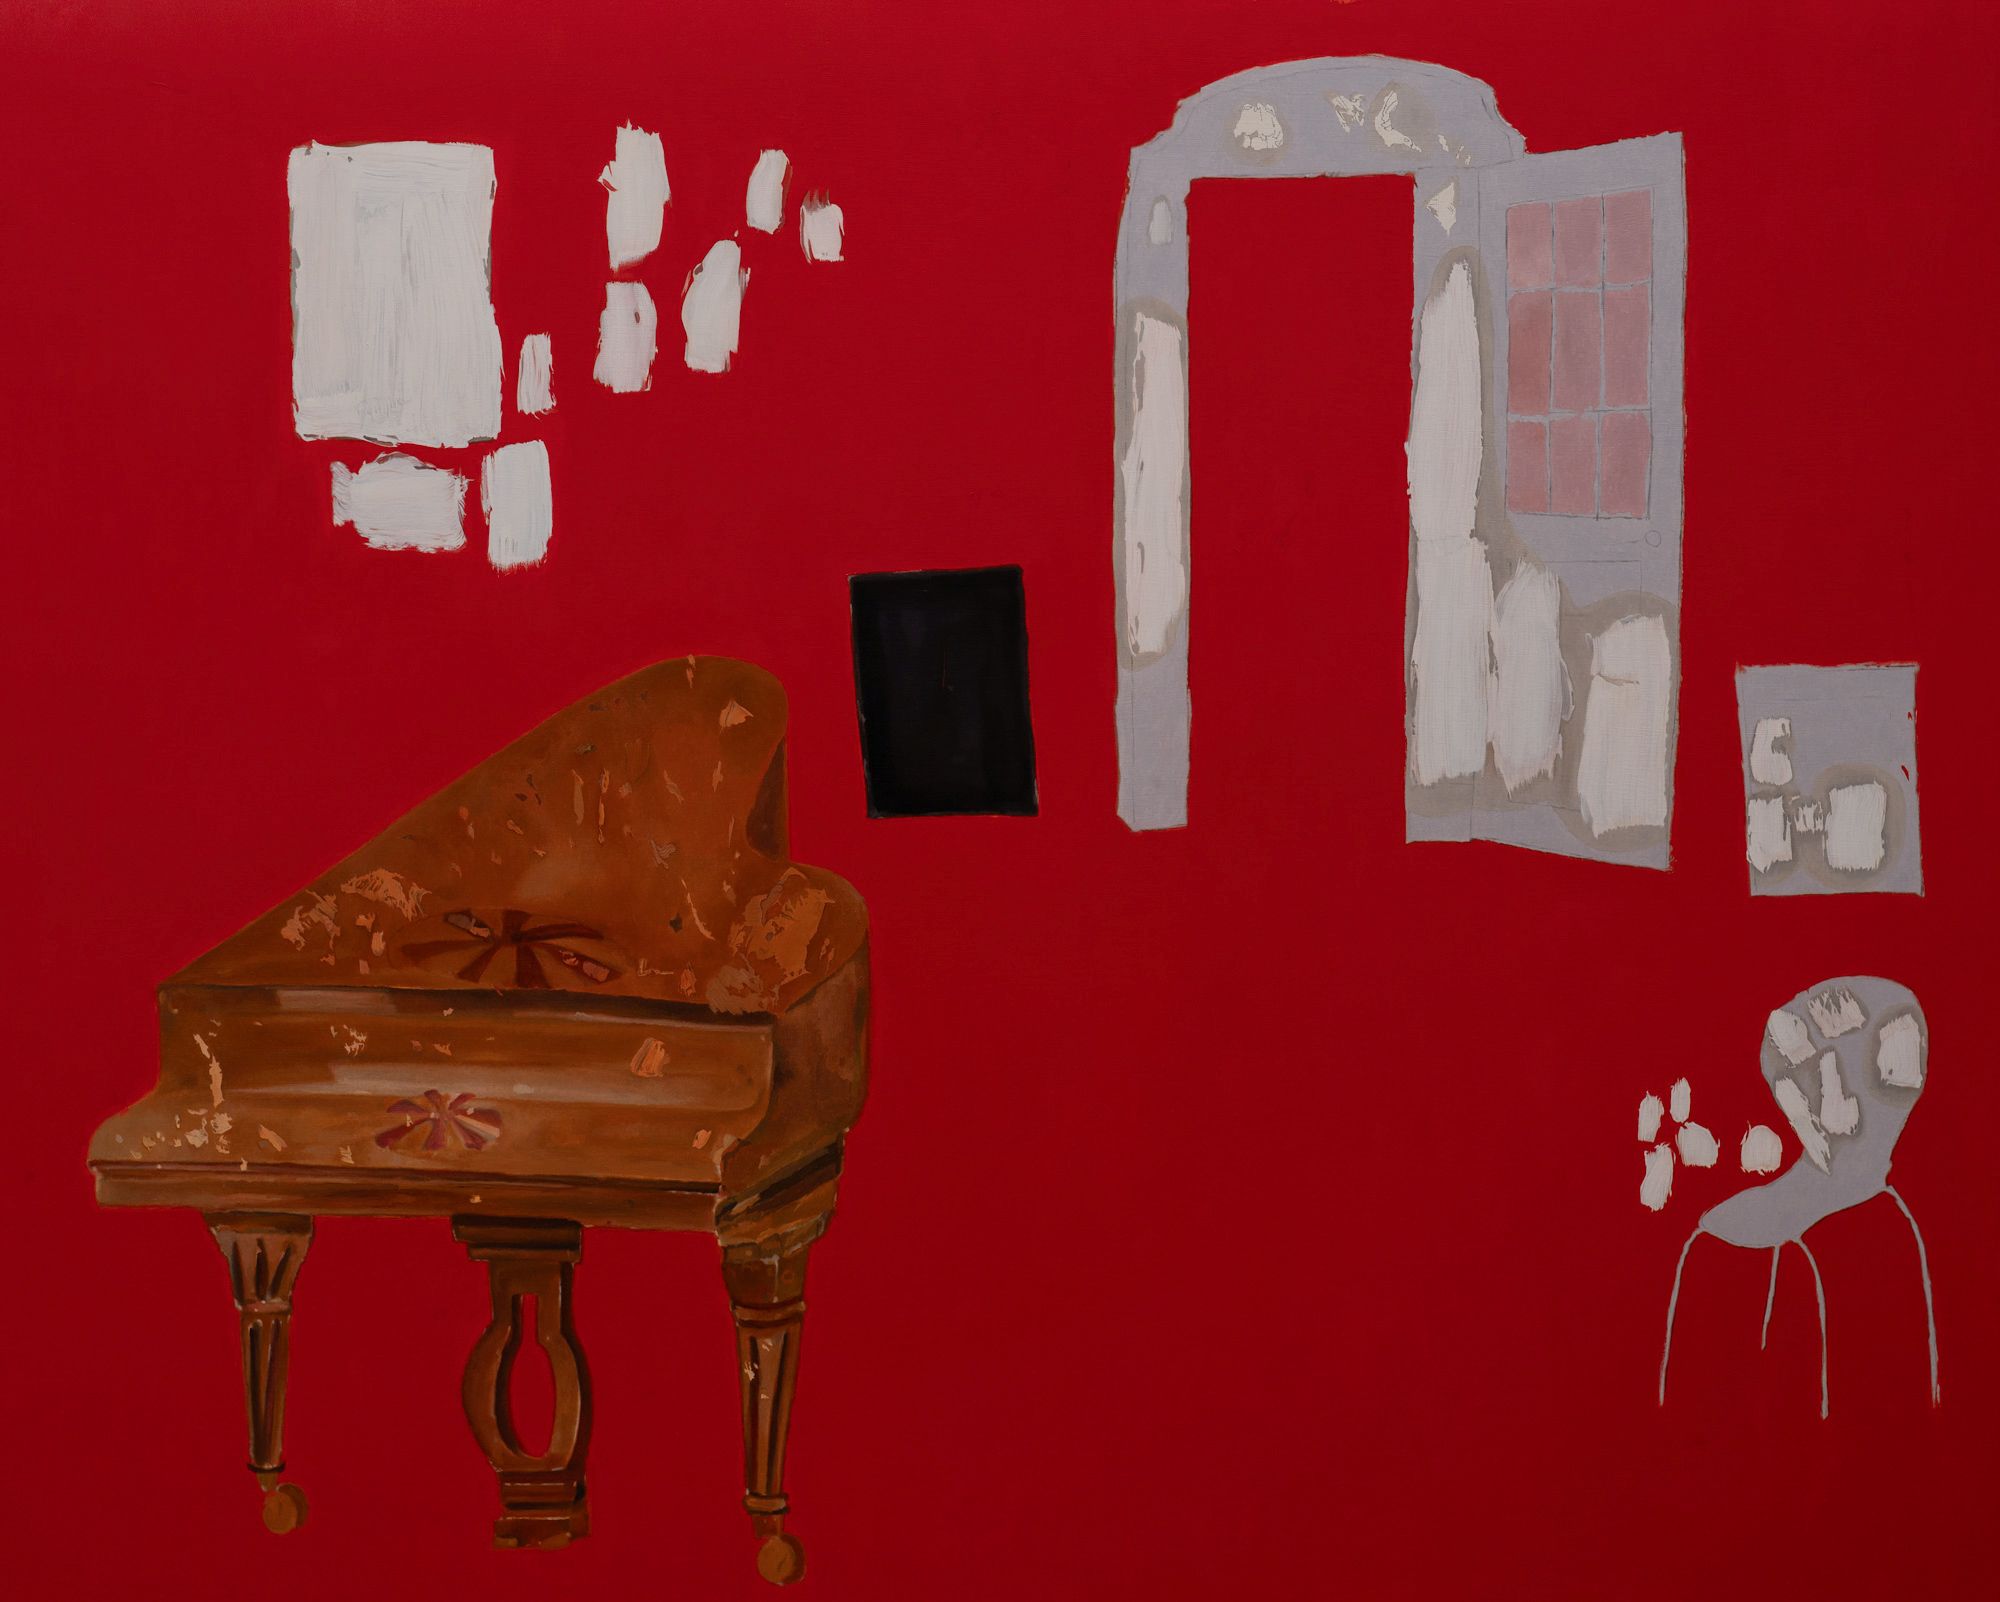 Mark Alexander's oil on canvas: vibrant red scene with ornate grand piano and abstract white architectural elements.